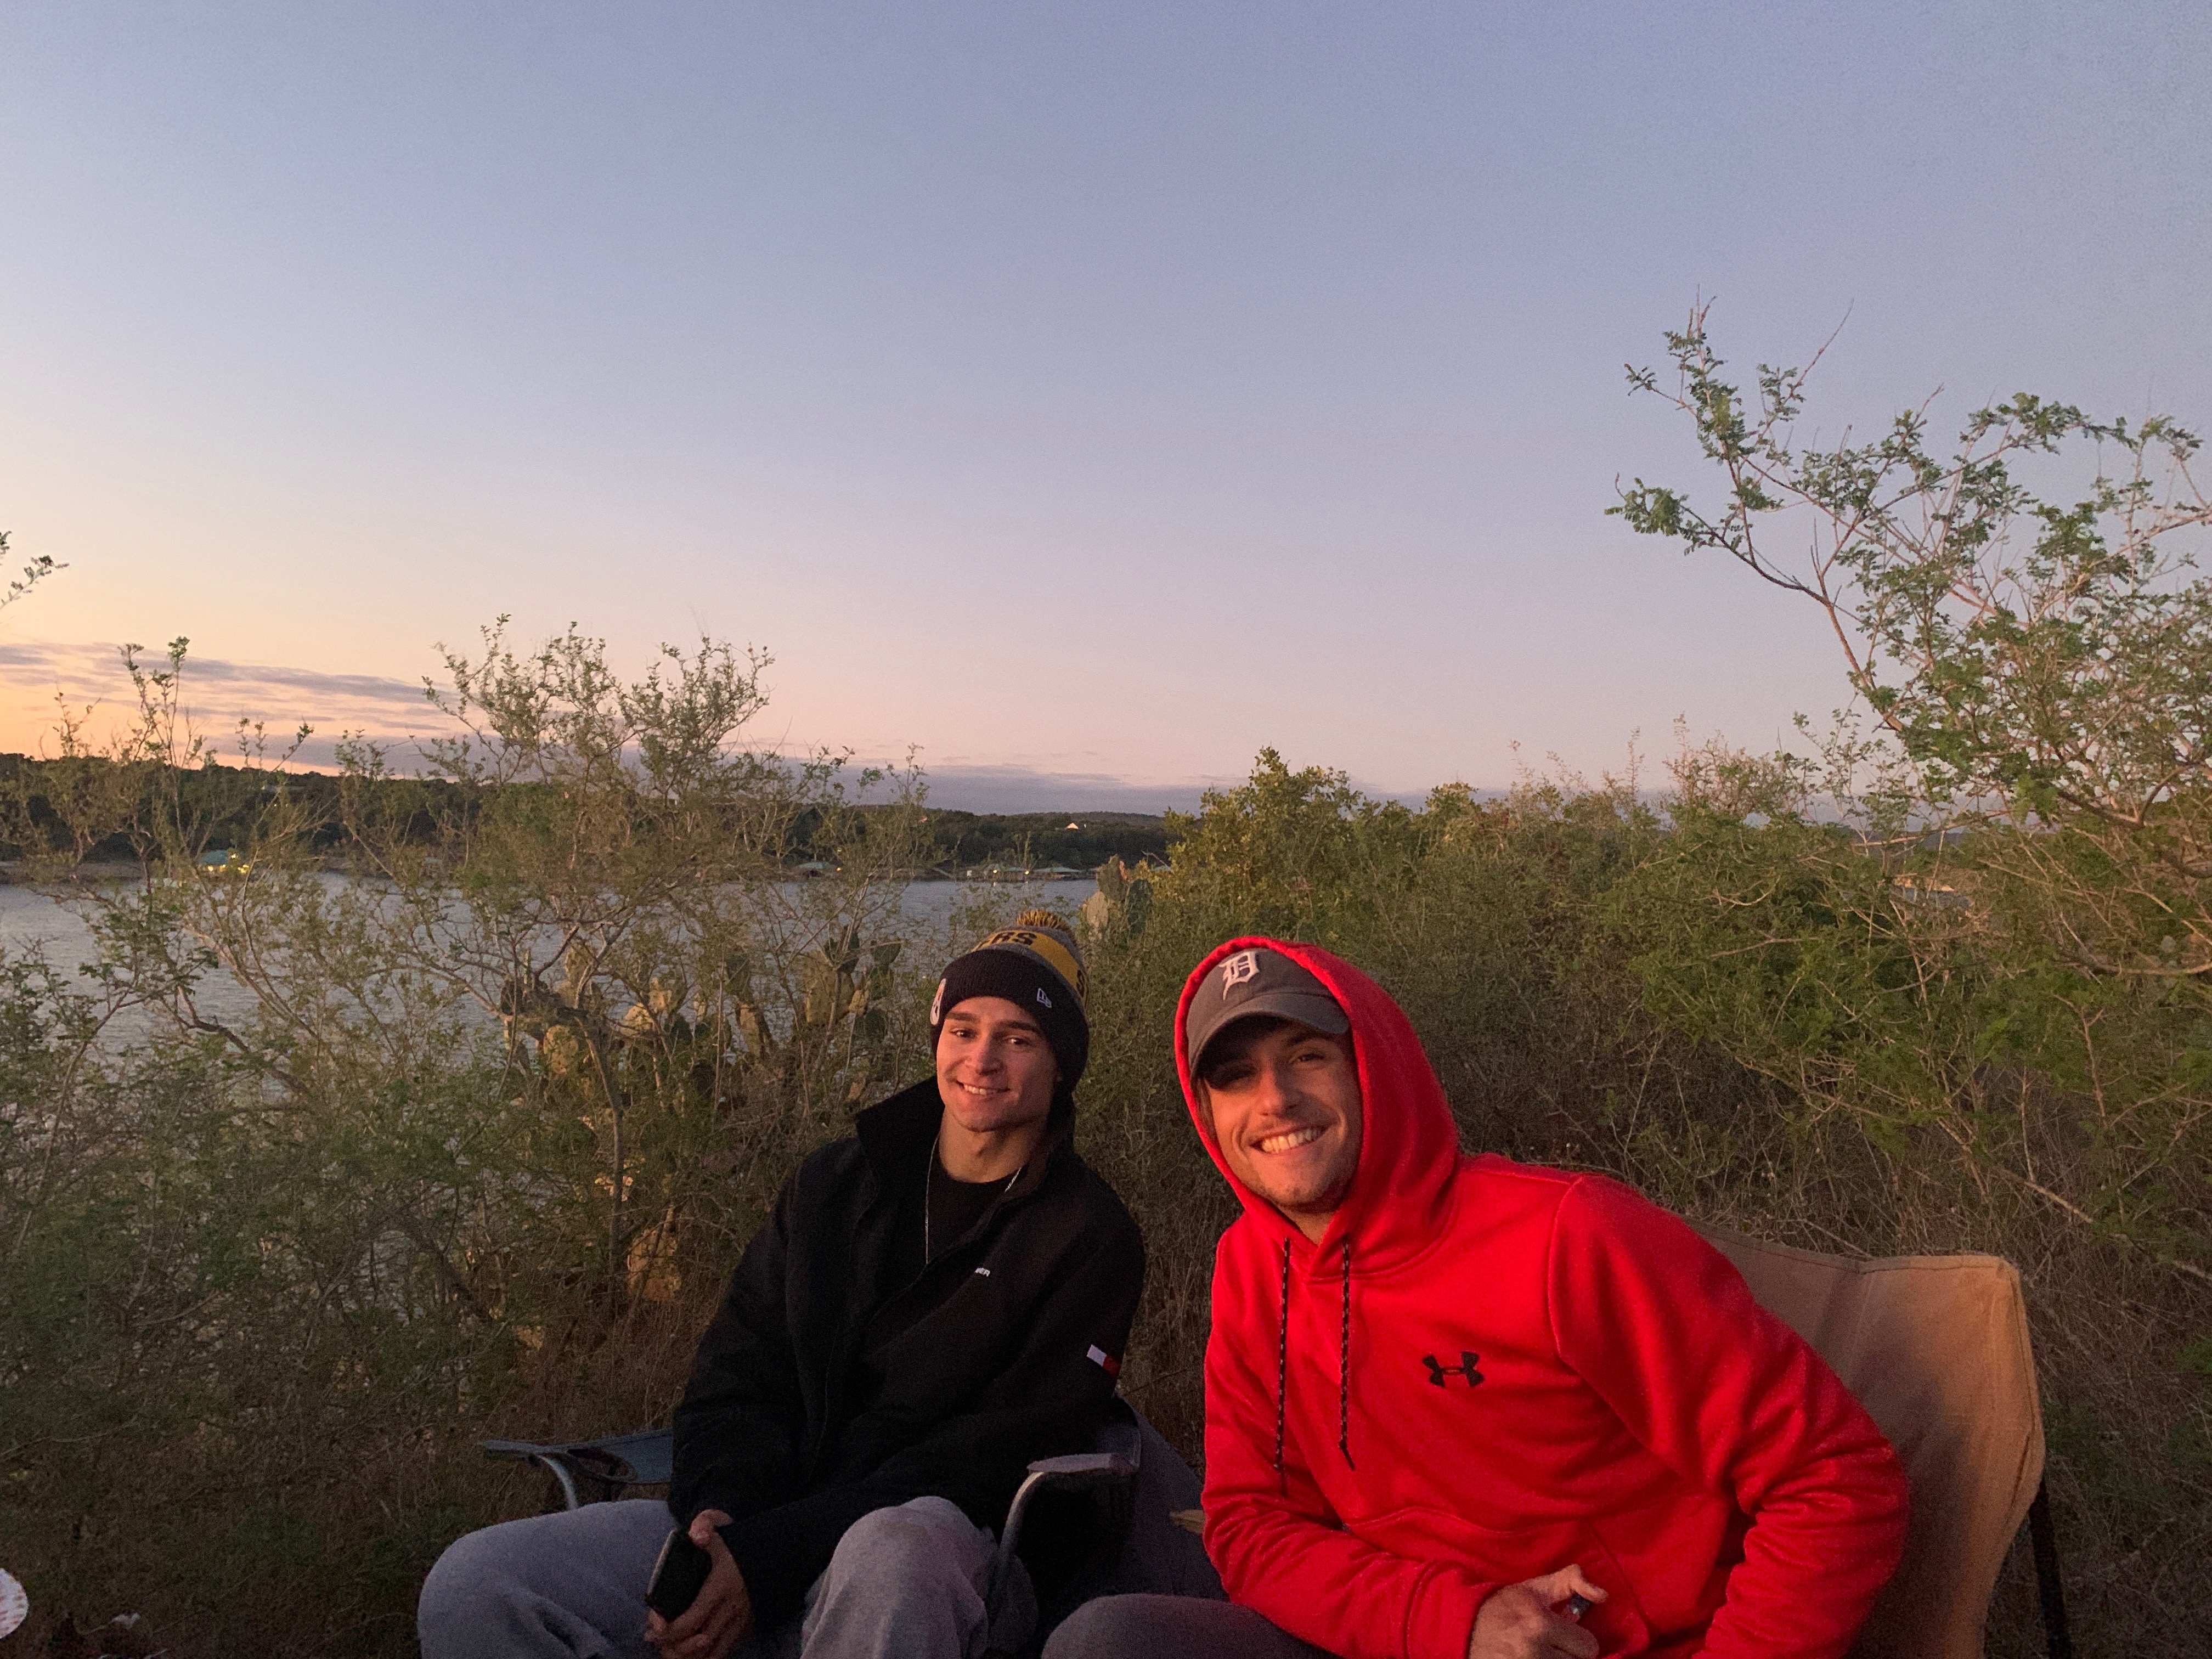 Two men sit in lawn chairs on a cliff with a sunset in the background.